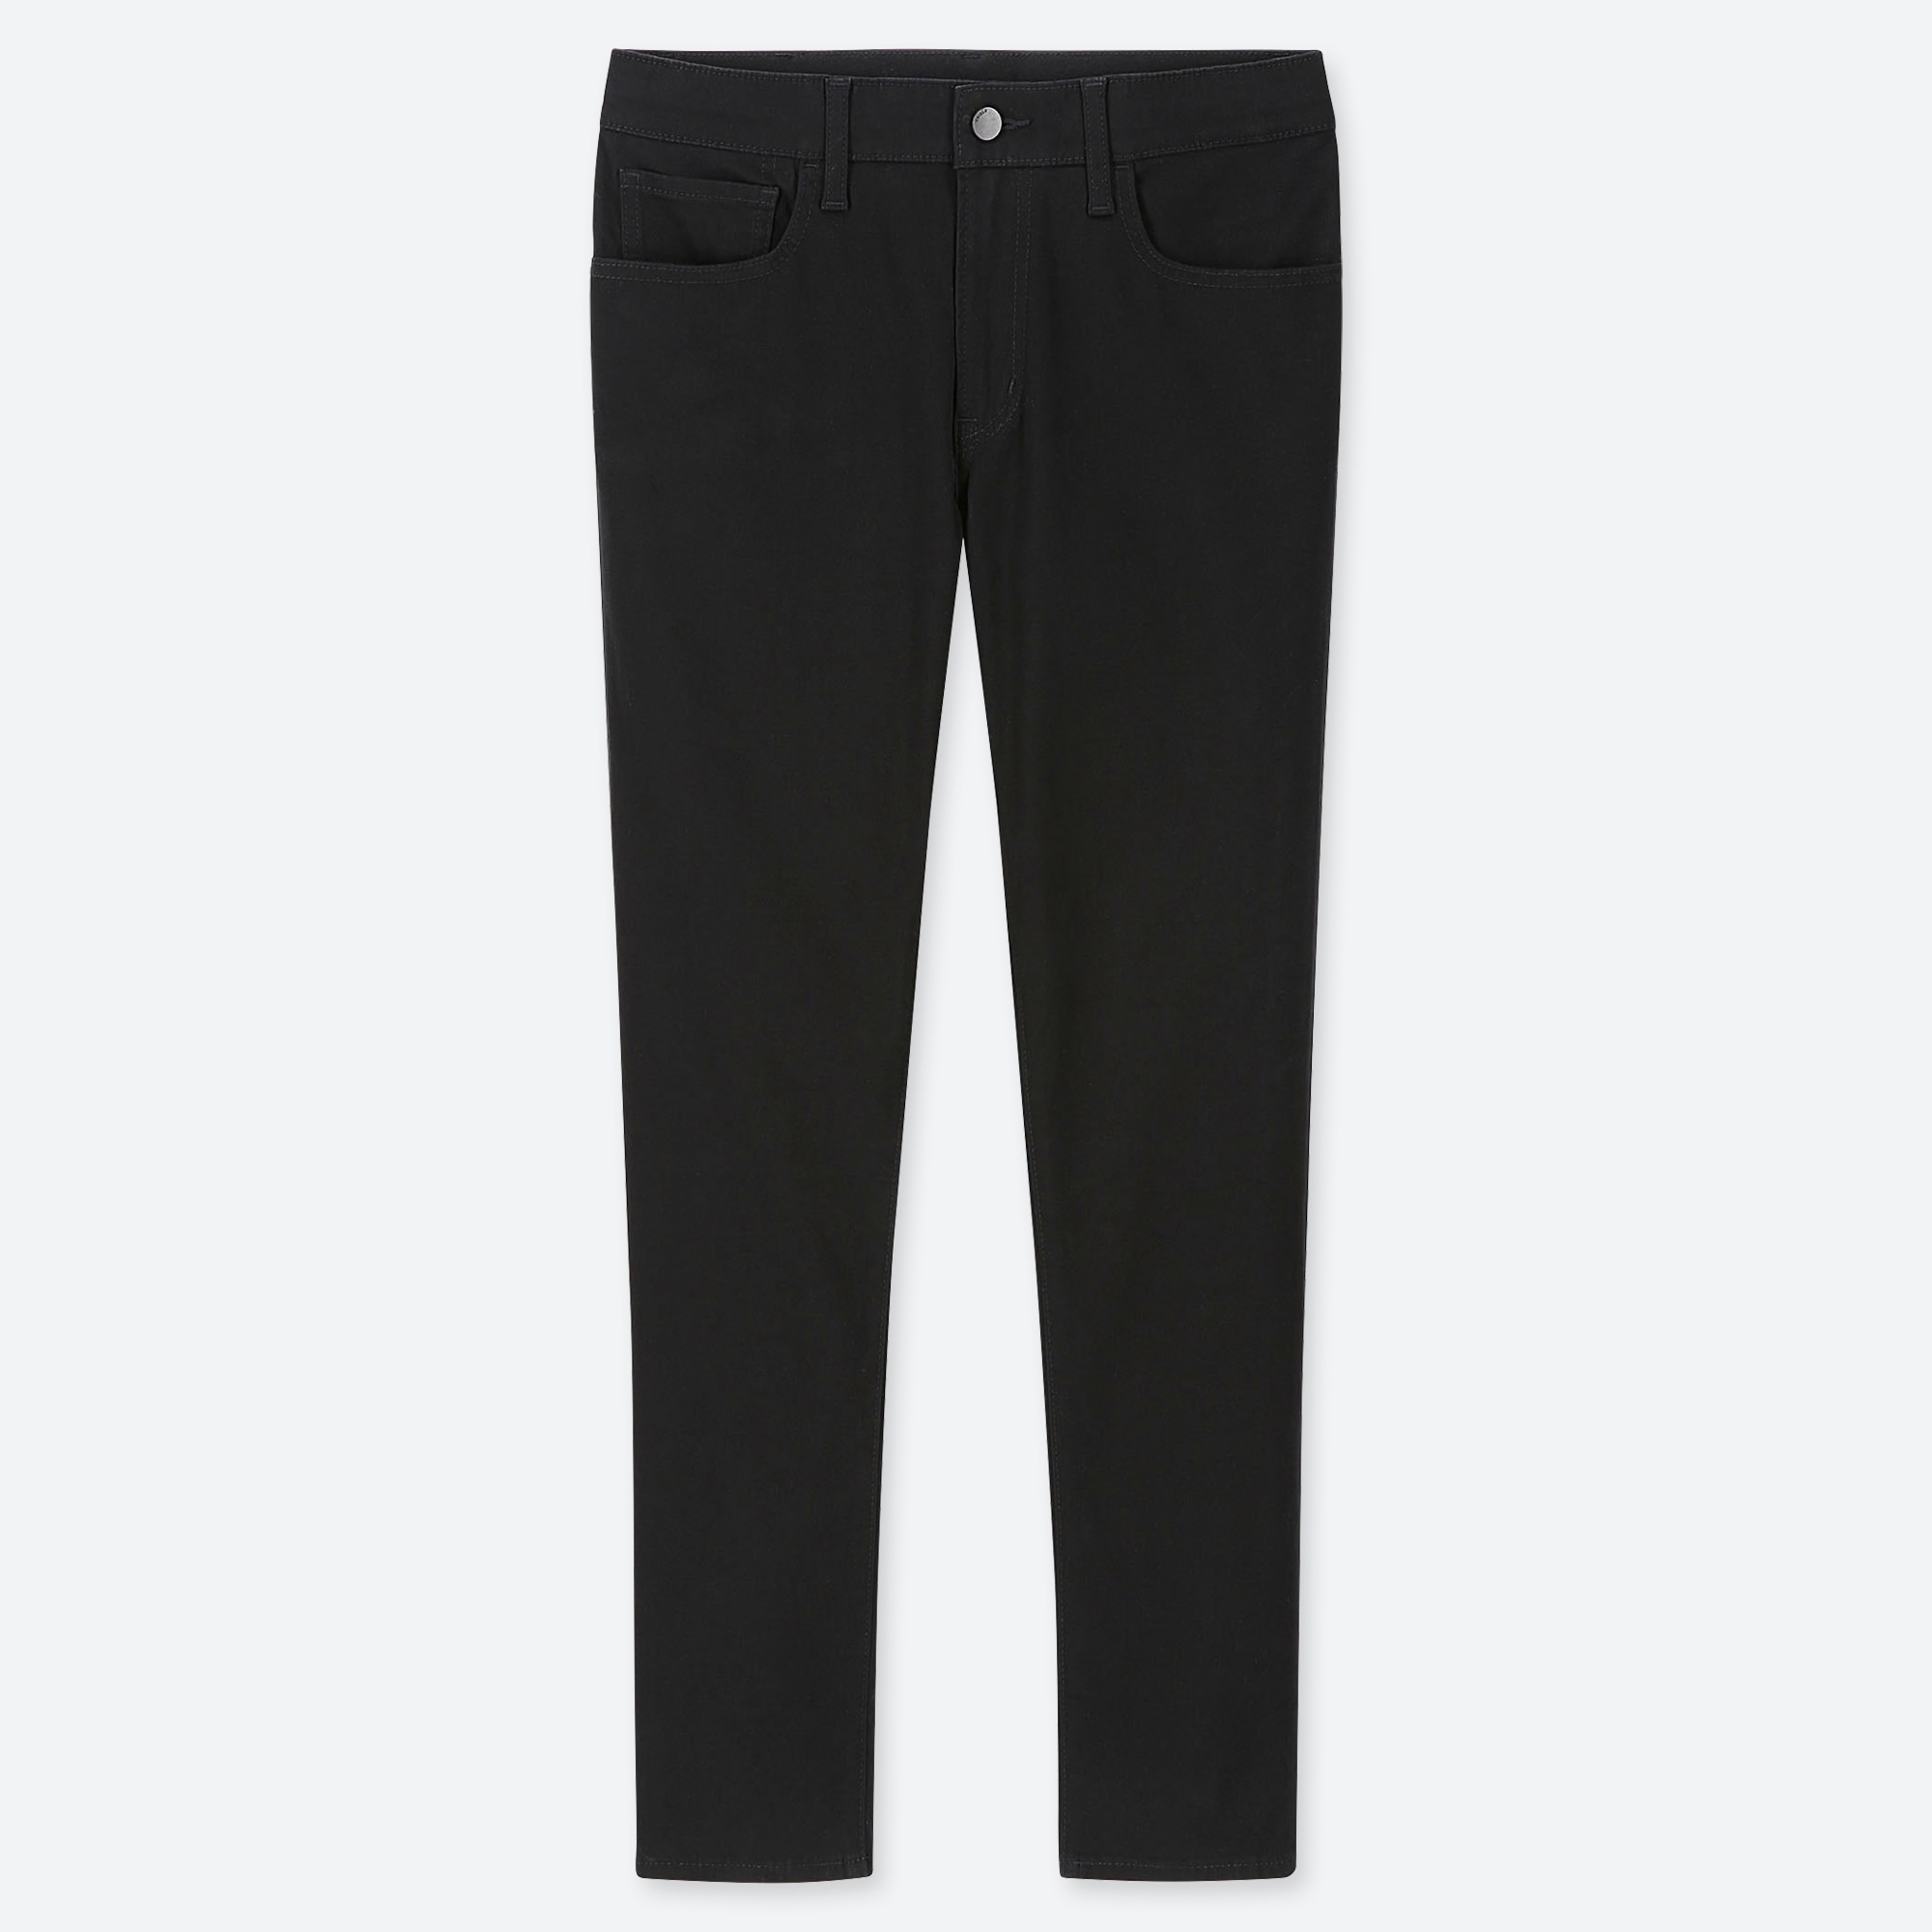 ezy skinny fit color jeans